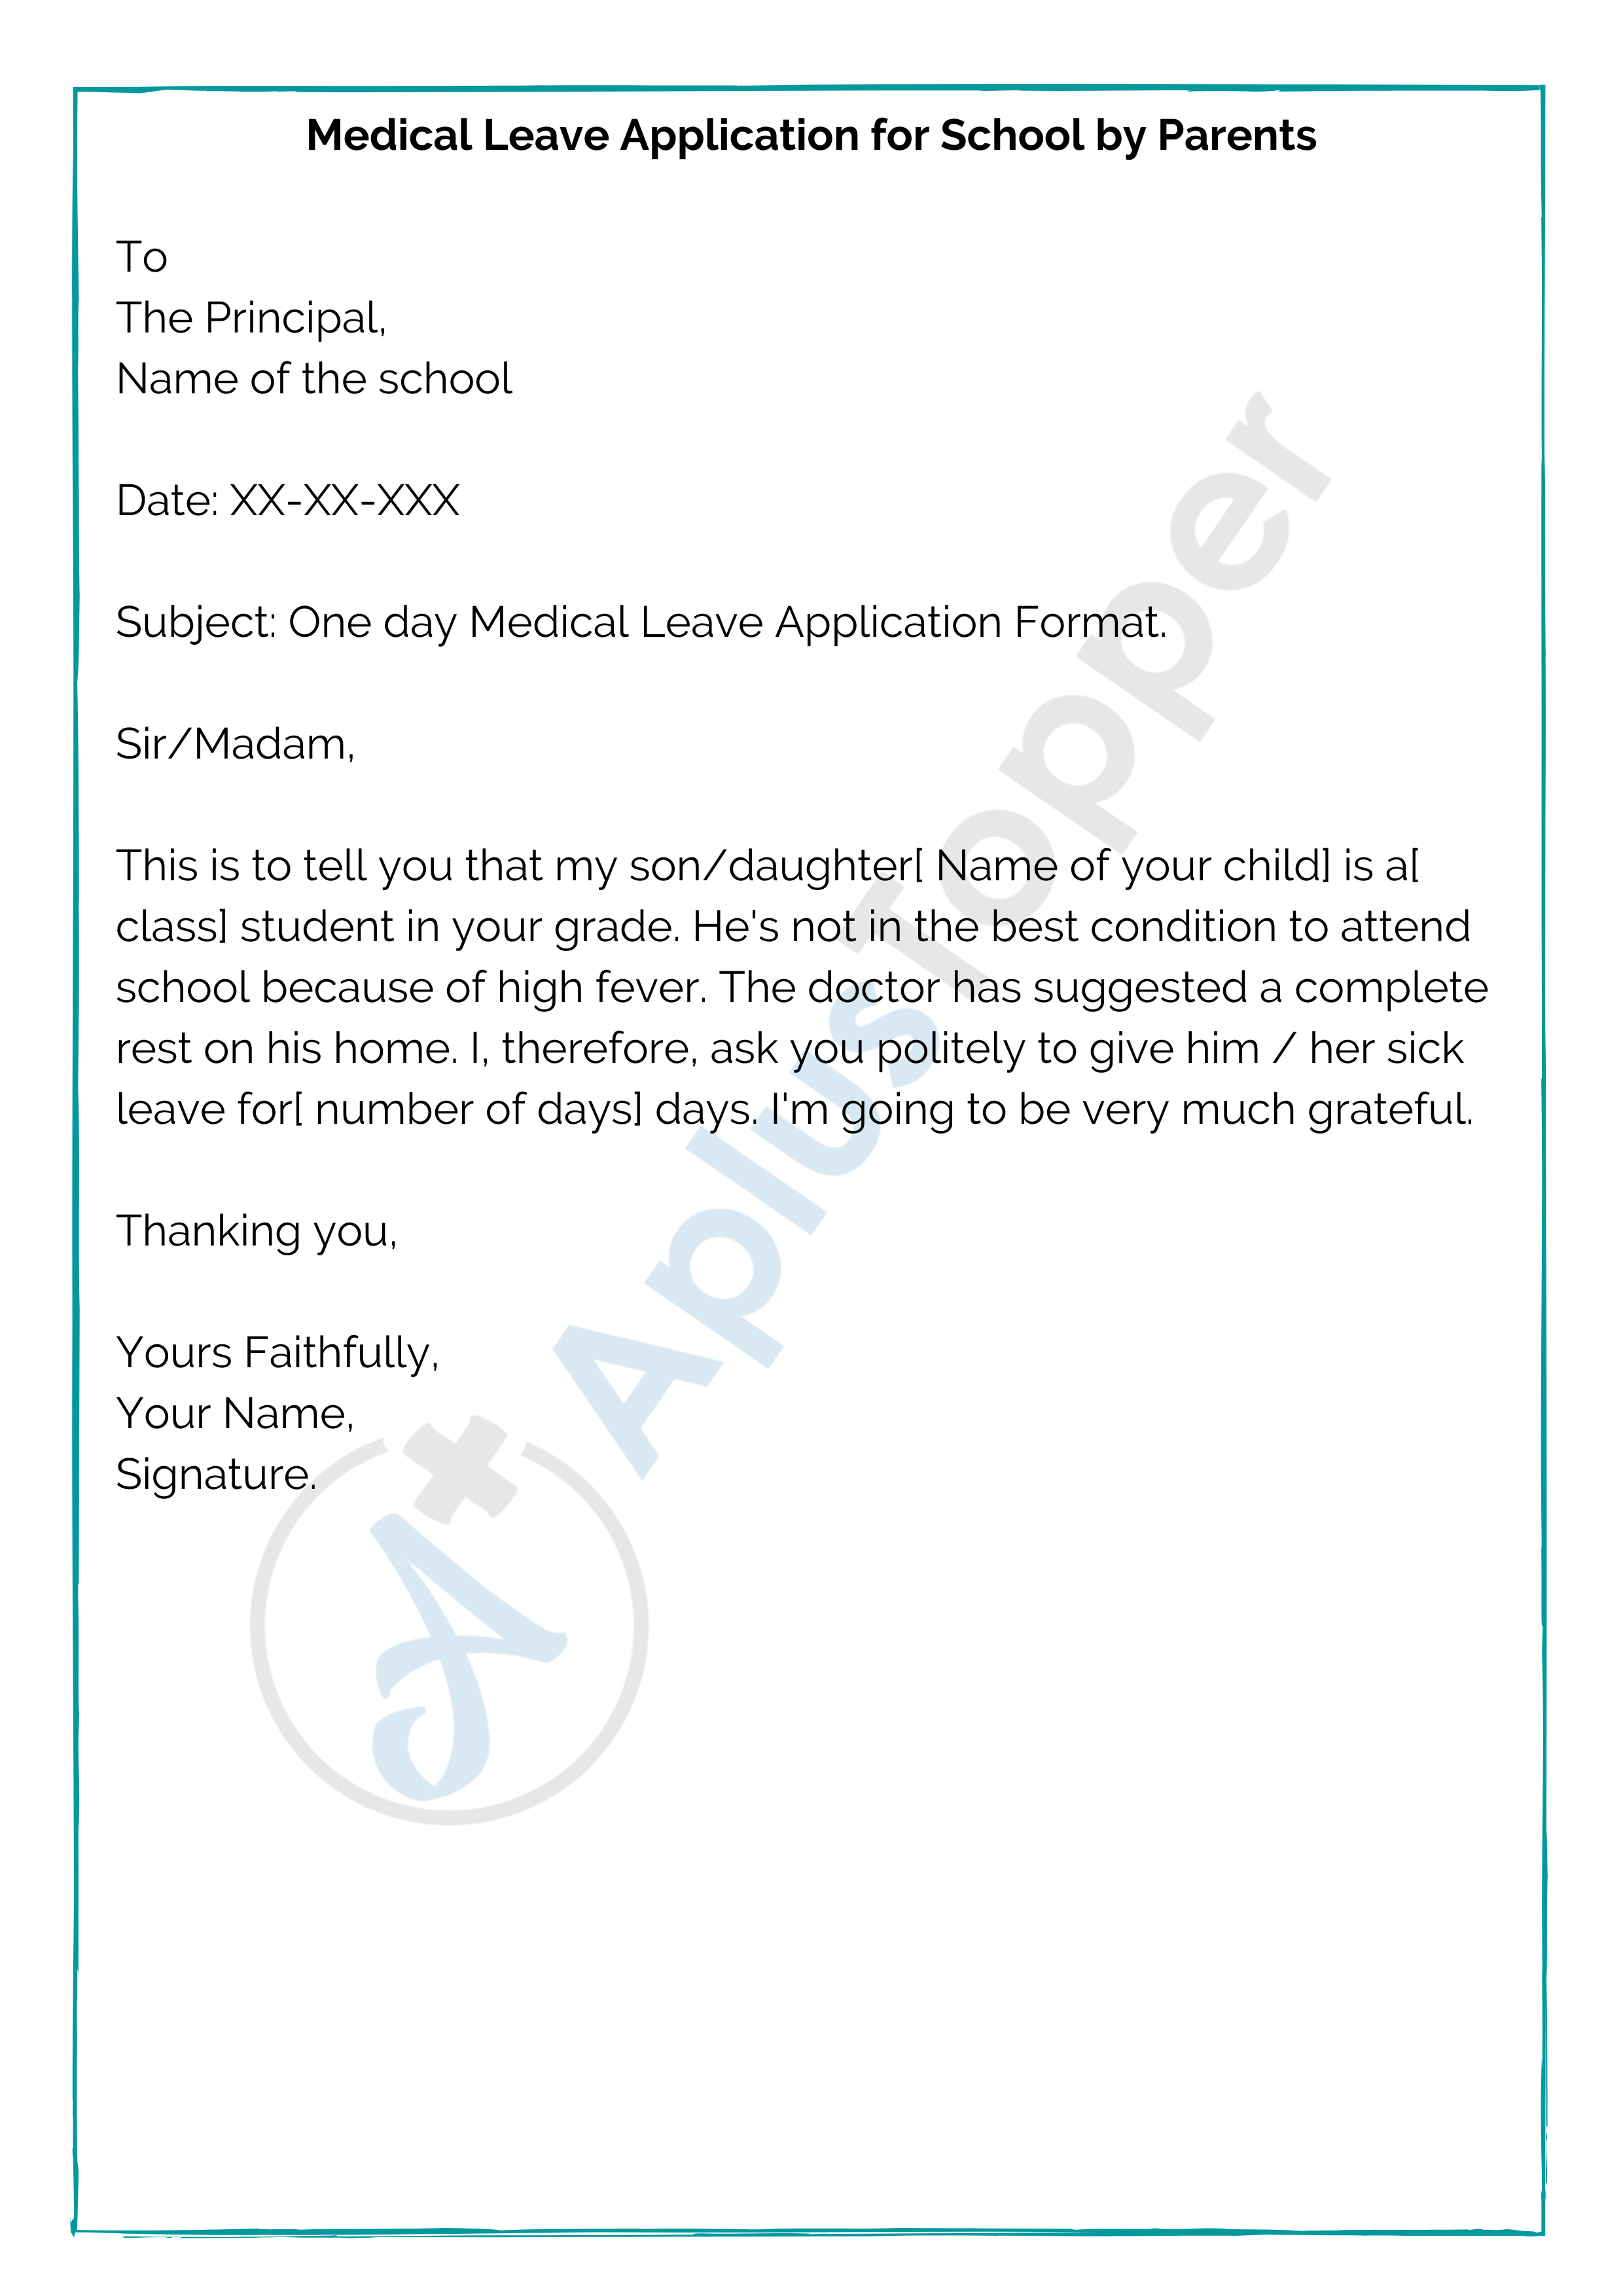 Medical Leave Application for School by Parents